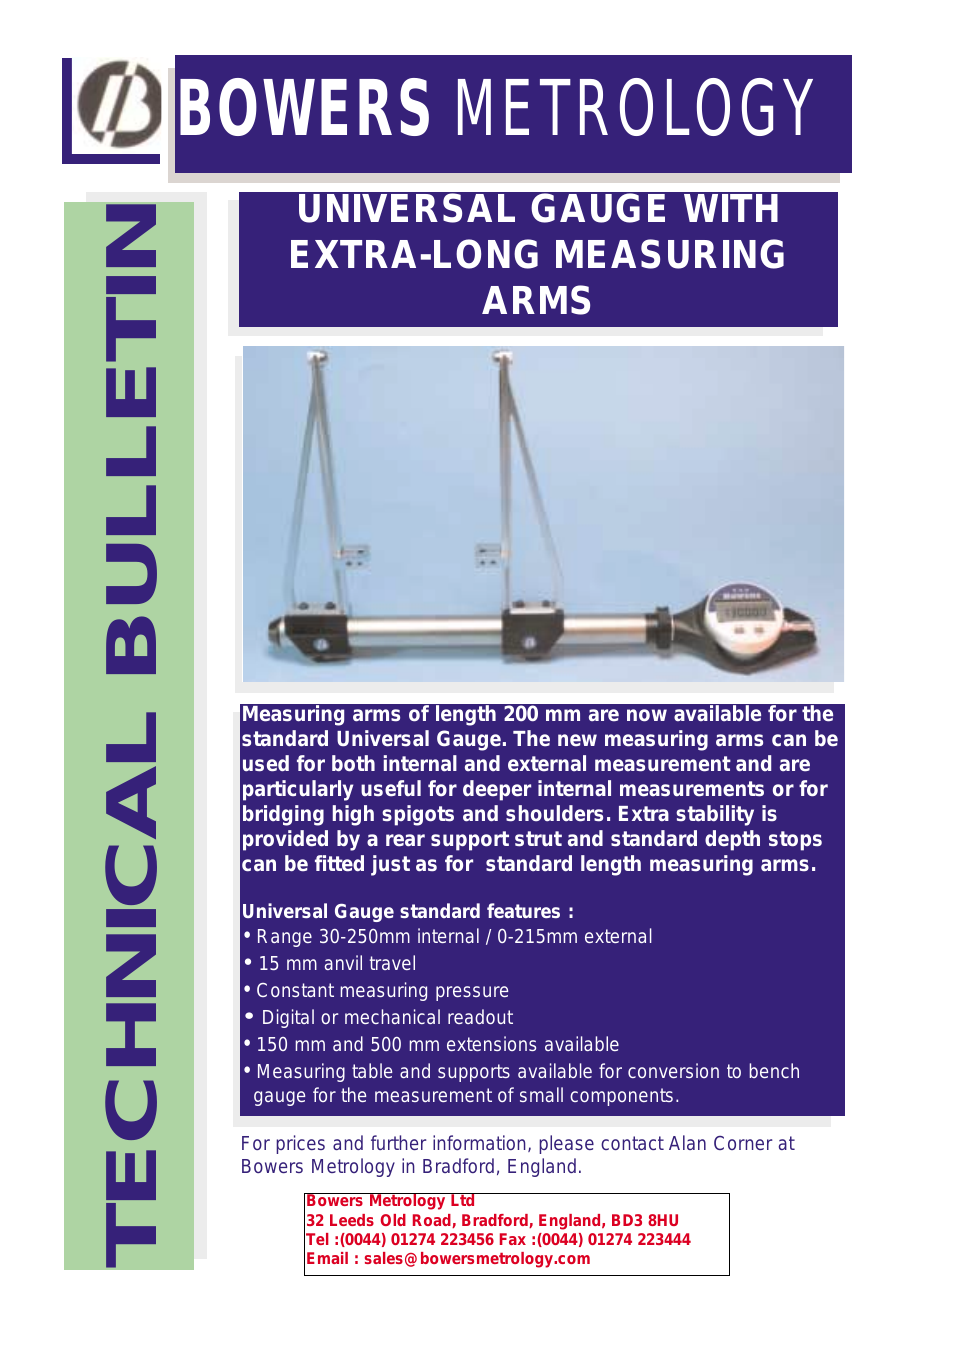 Universal Gauge with extra long measuring arms